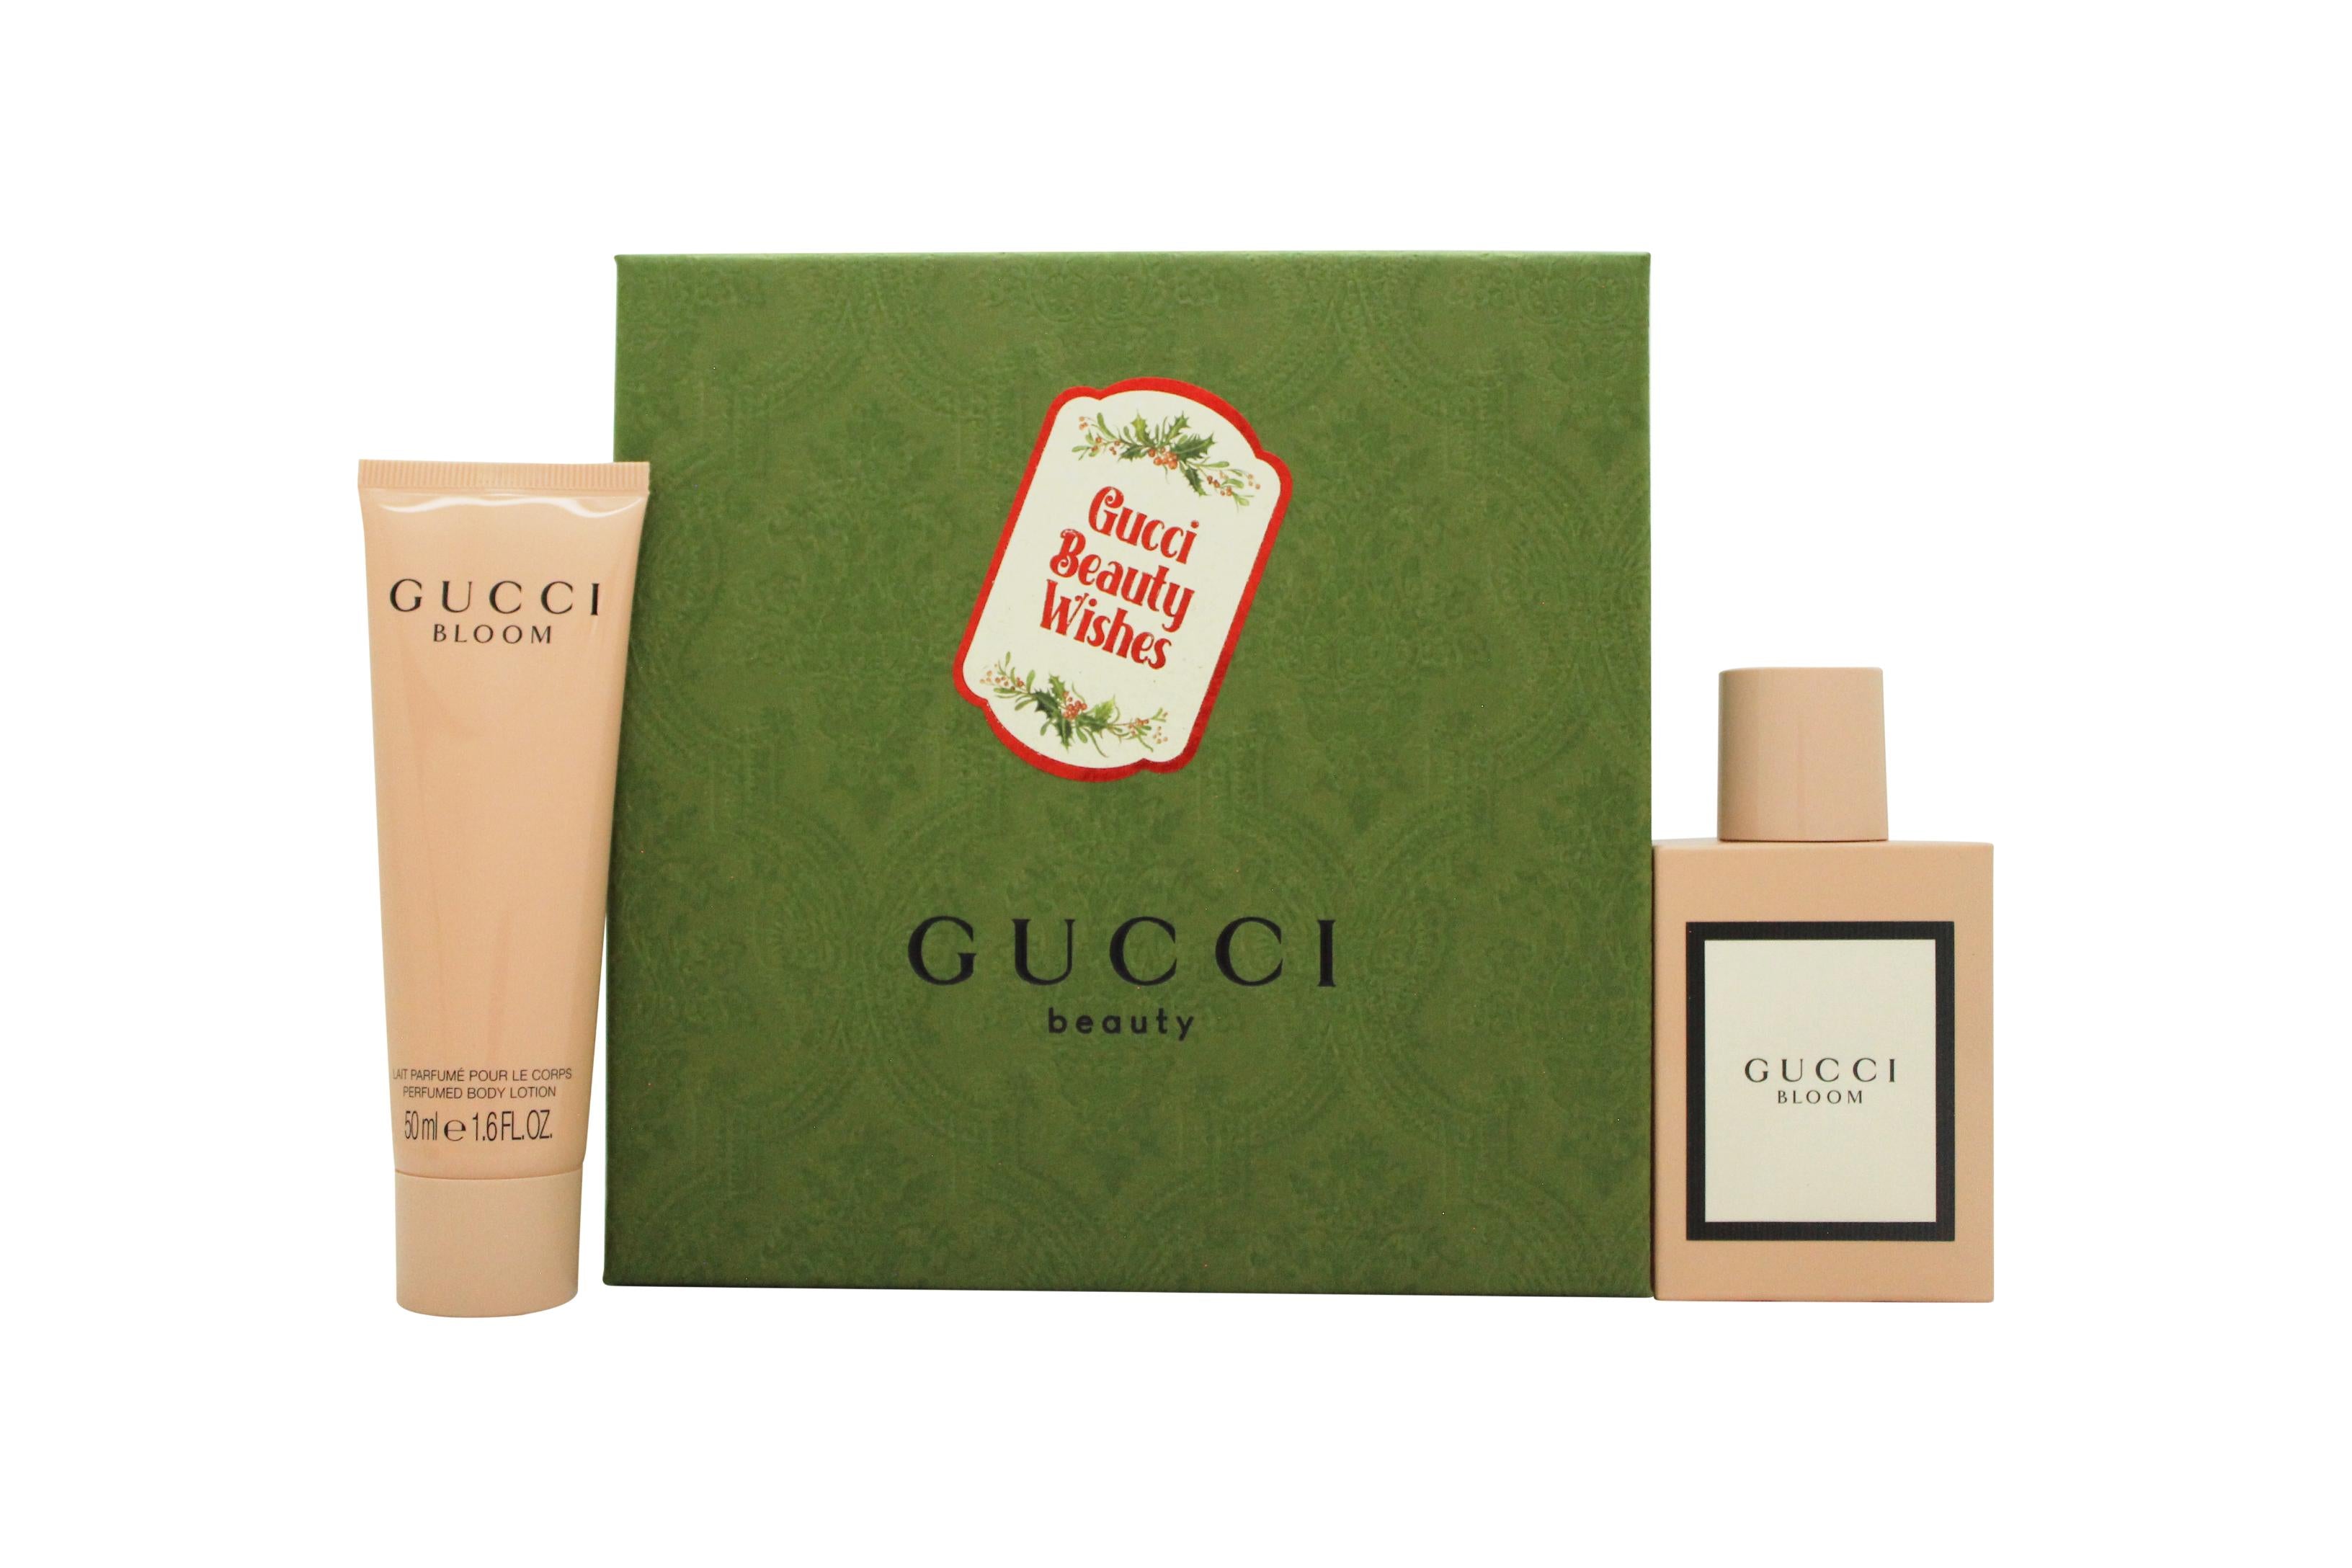 View Gucci Bloom Gift Set 50ml EDP 50ml Body Lotion information